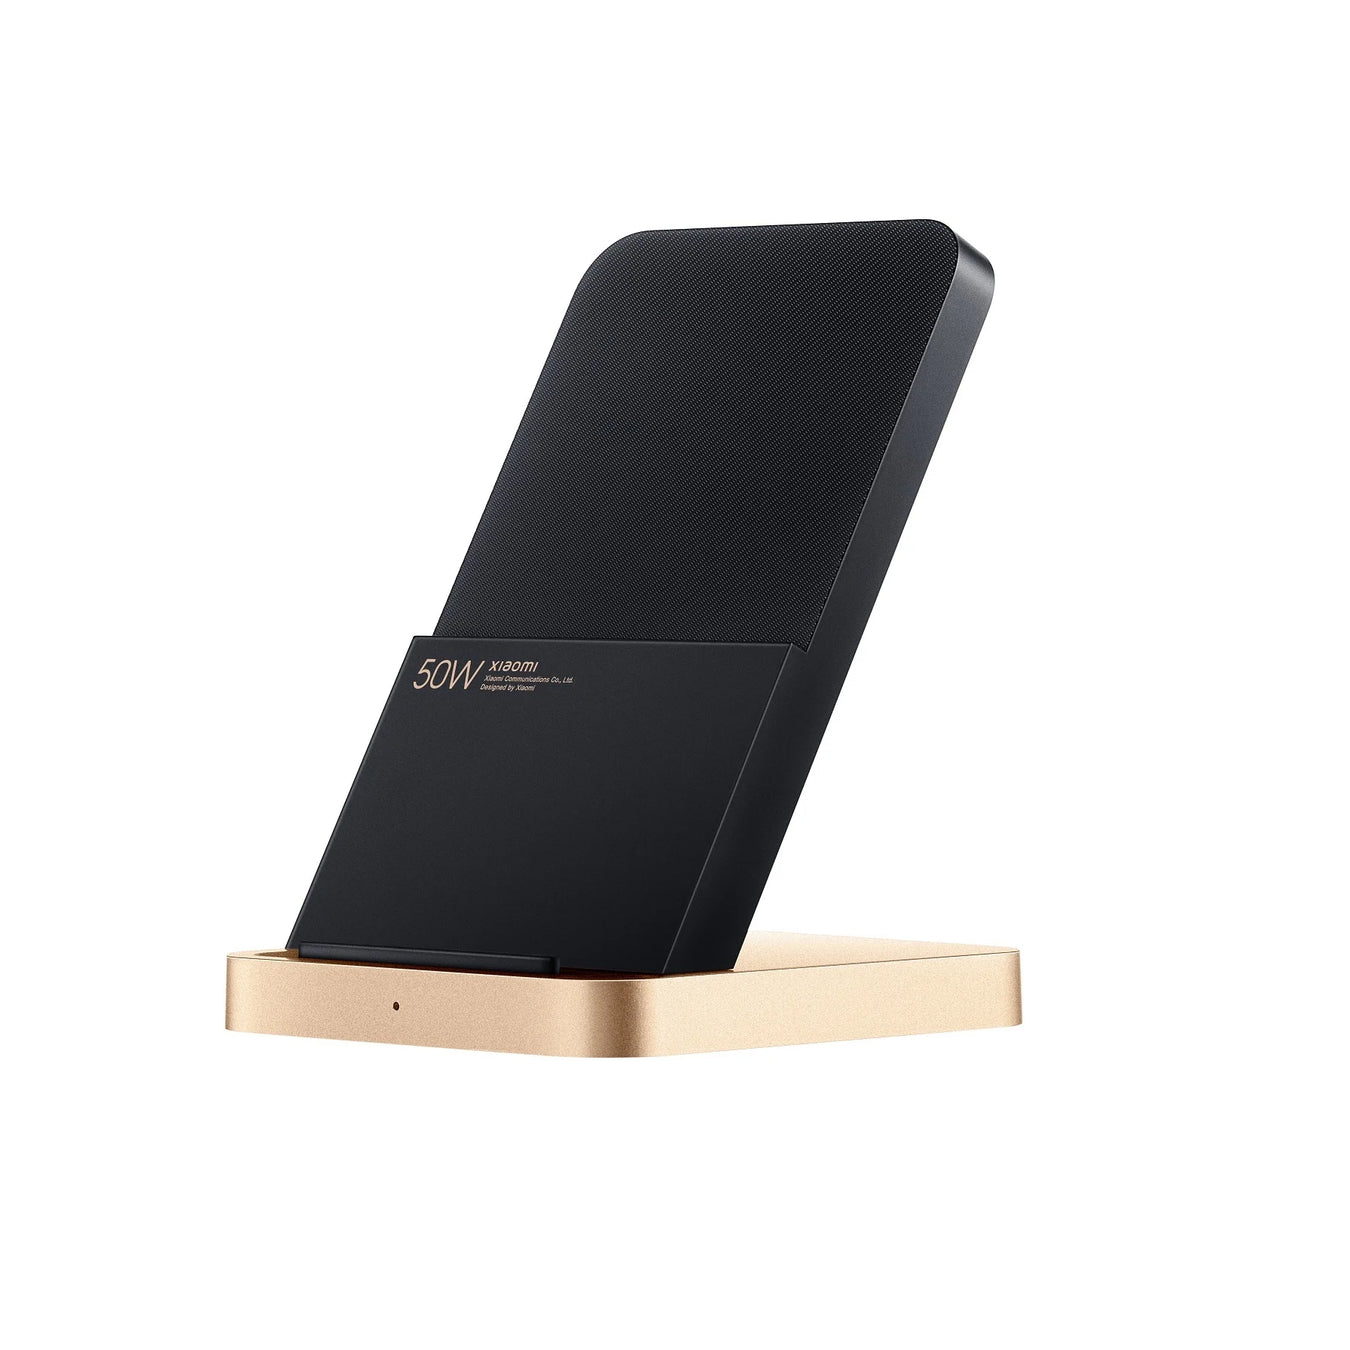 Xiaomi's Wireless Chargers